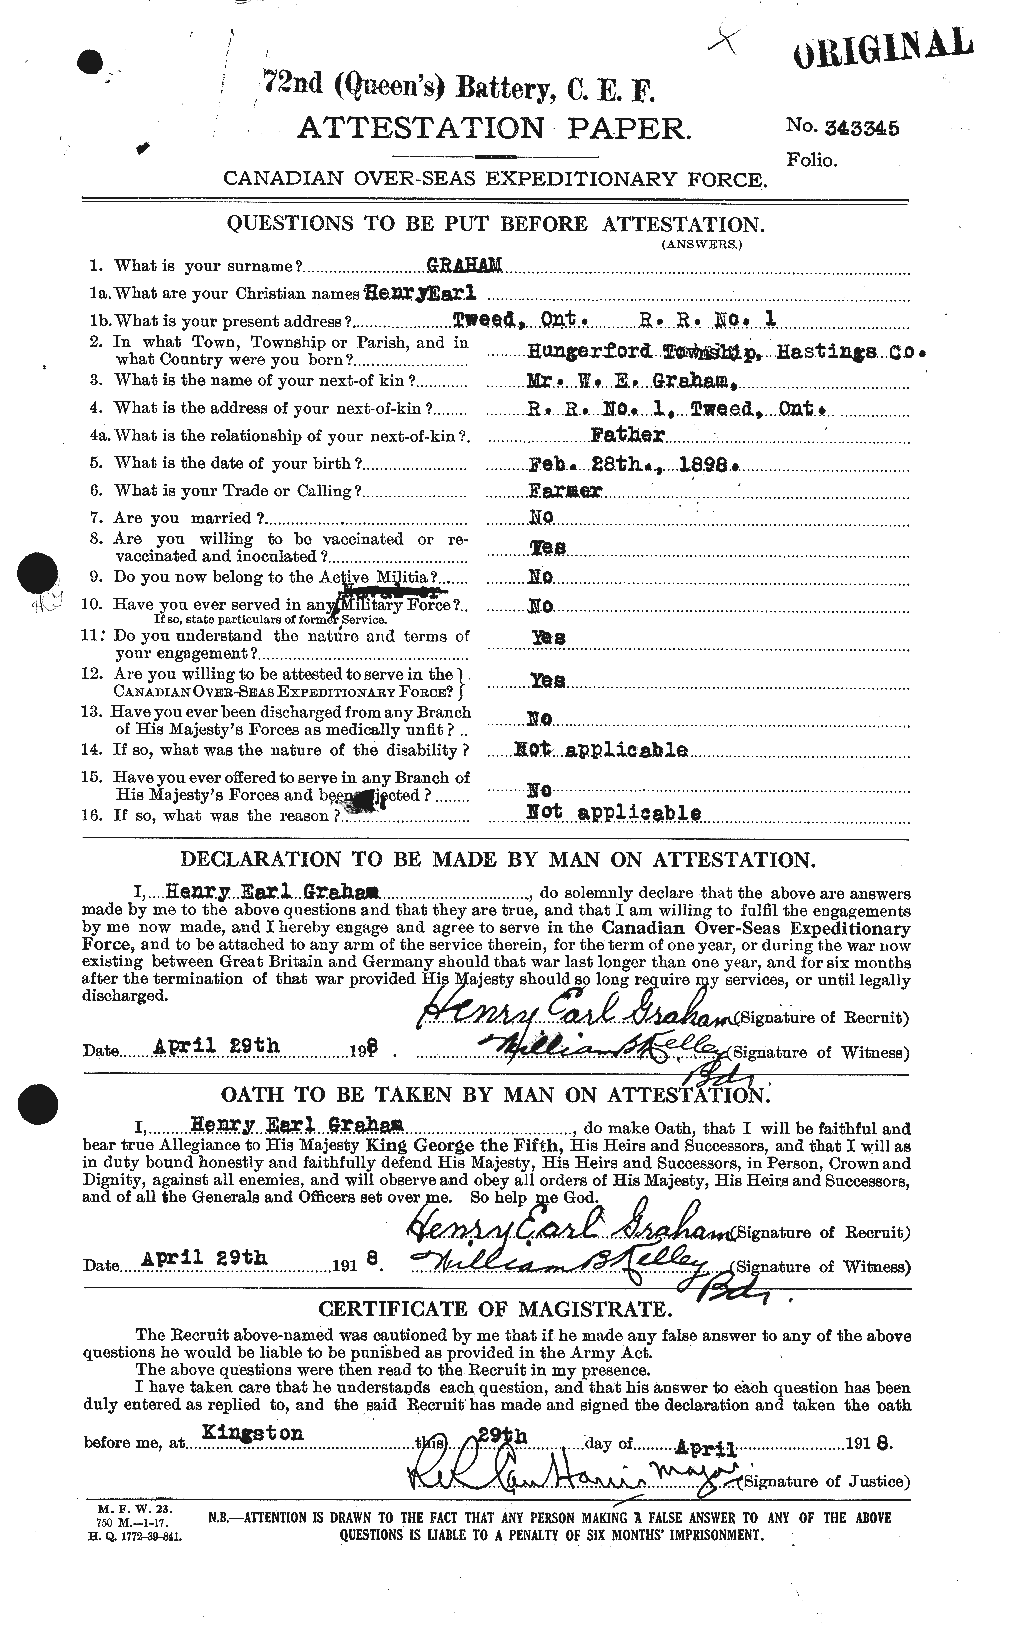 Personnel Records of the First World War - CEF 357735a